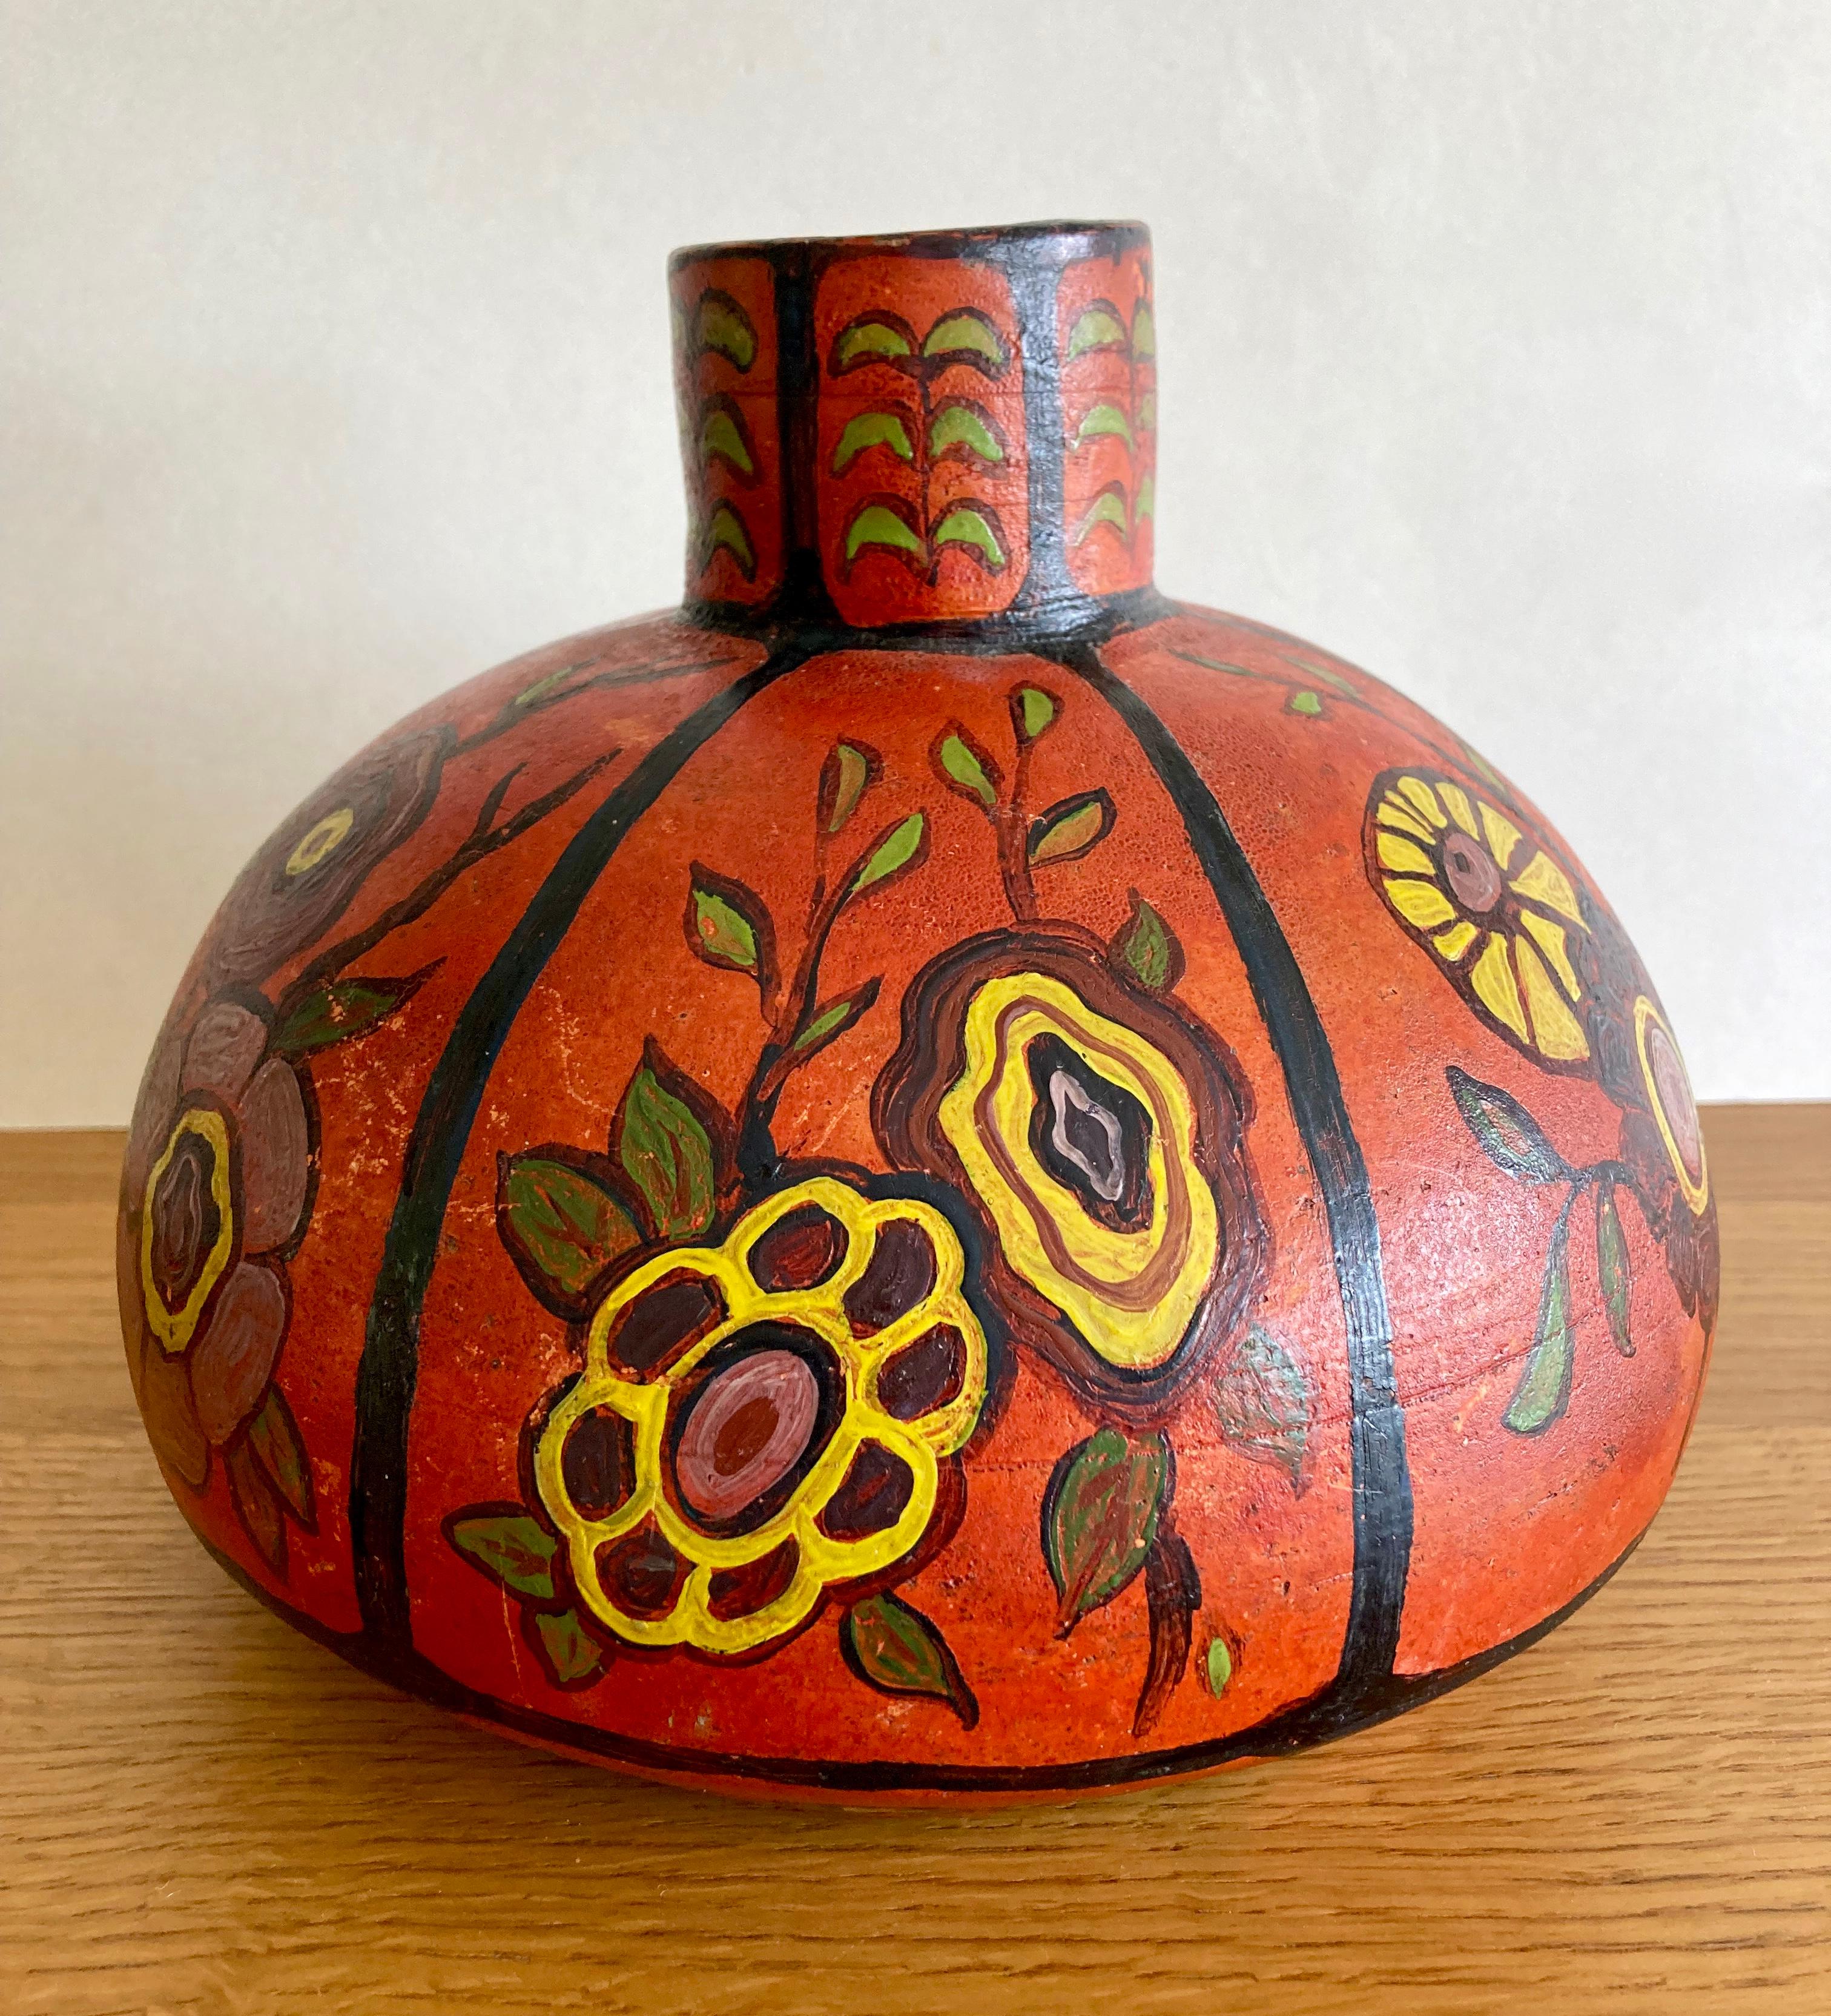 A one-of-a-kind, antique pottery vase. Definitely a statement piece.  

The vase has been sourced in Alsace, France. However, it has no maker's marks or signatures thus its origine and its date of fabrication are unknown. The vase has a very